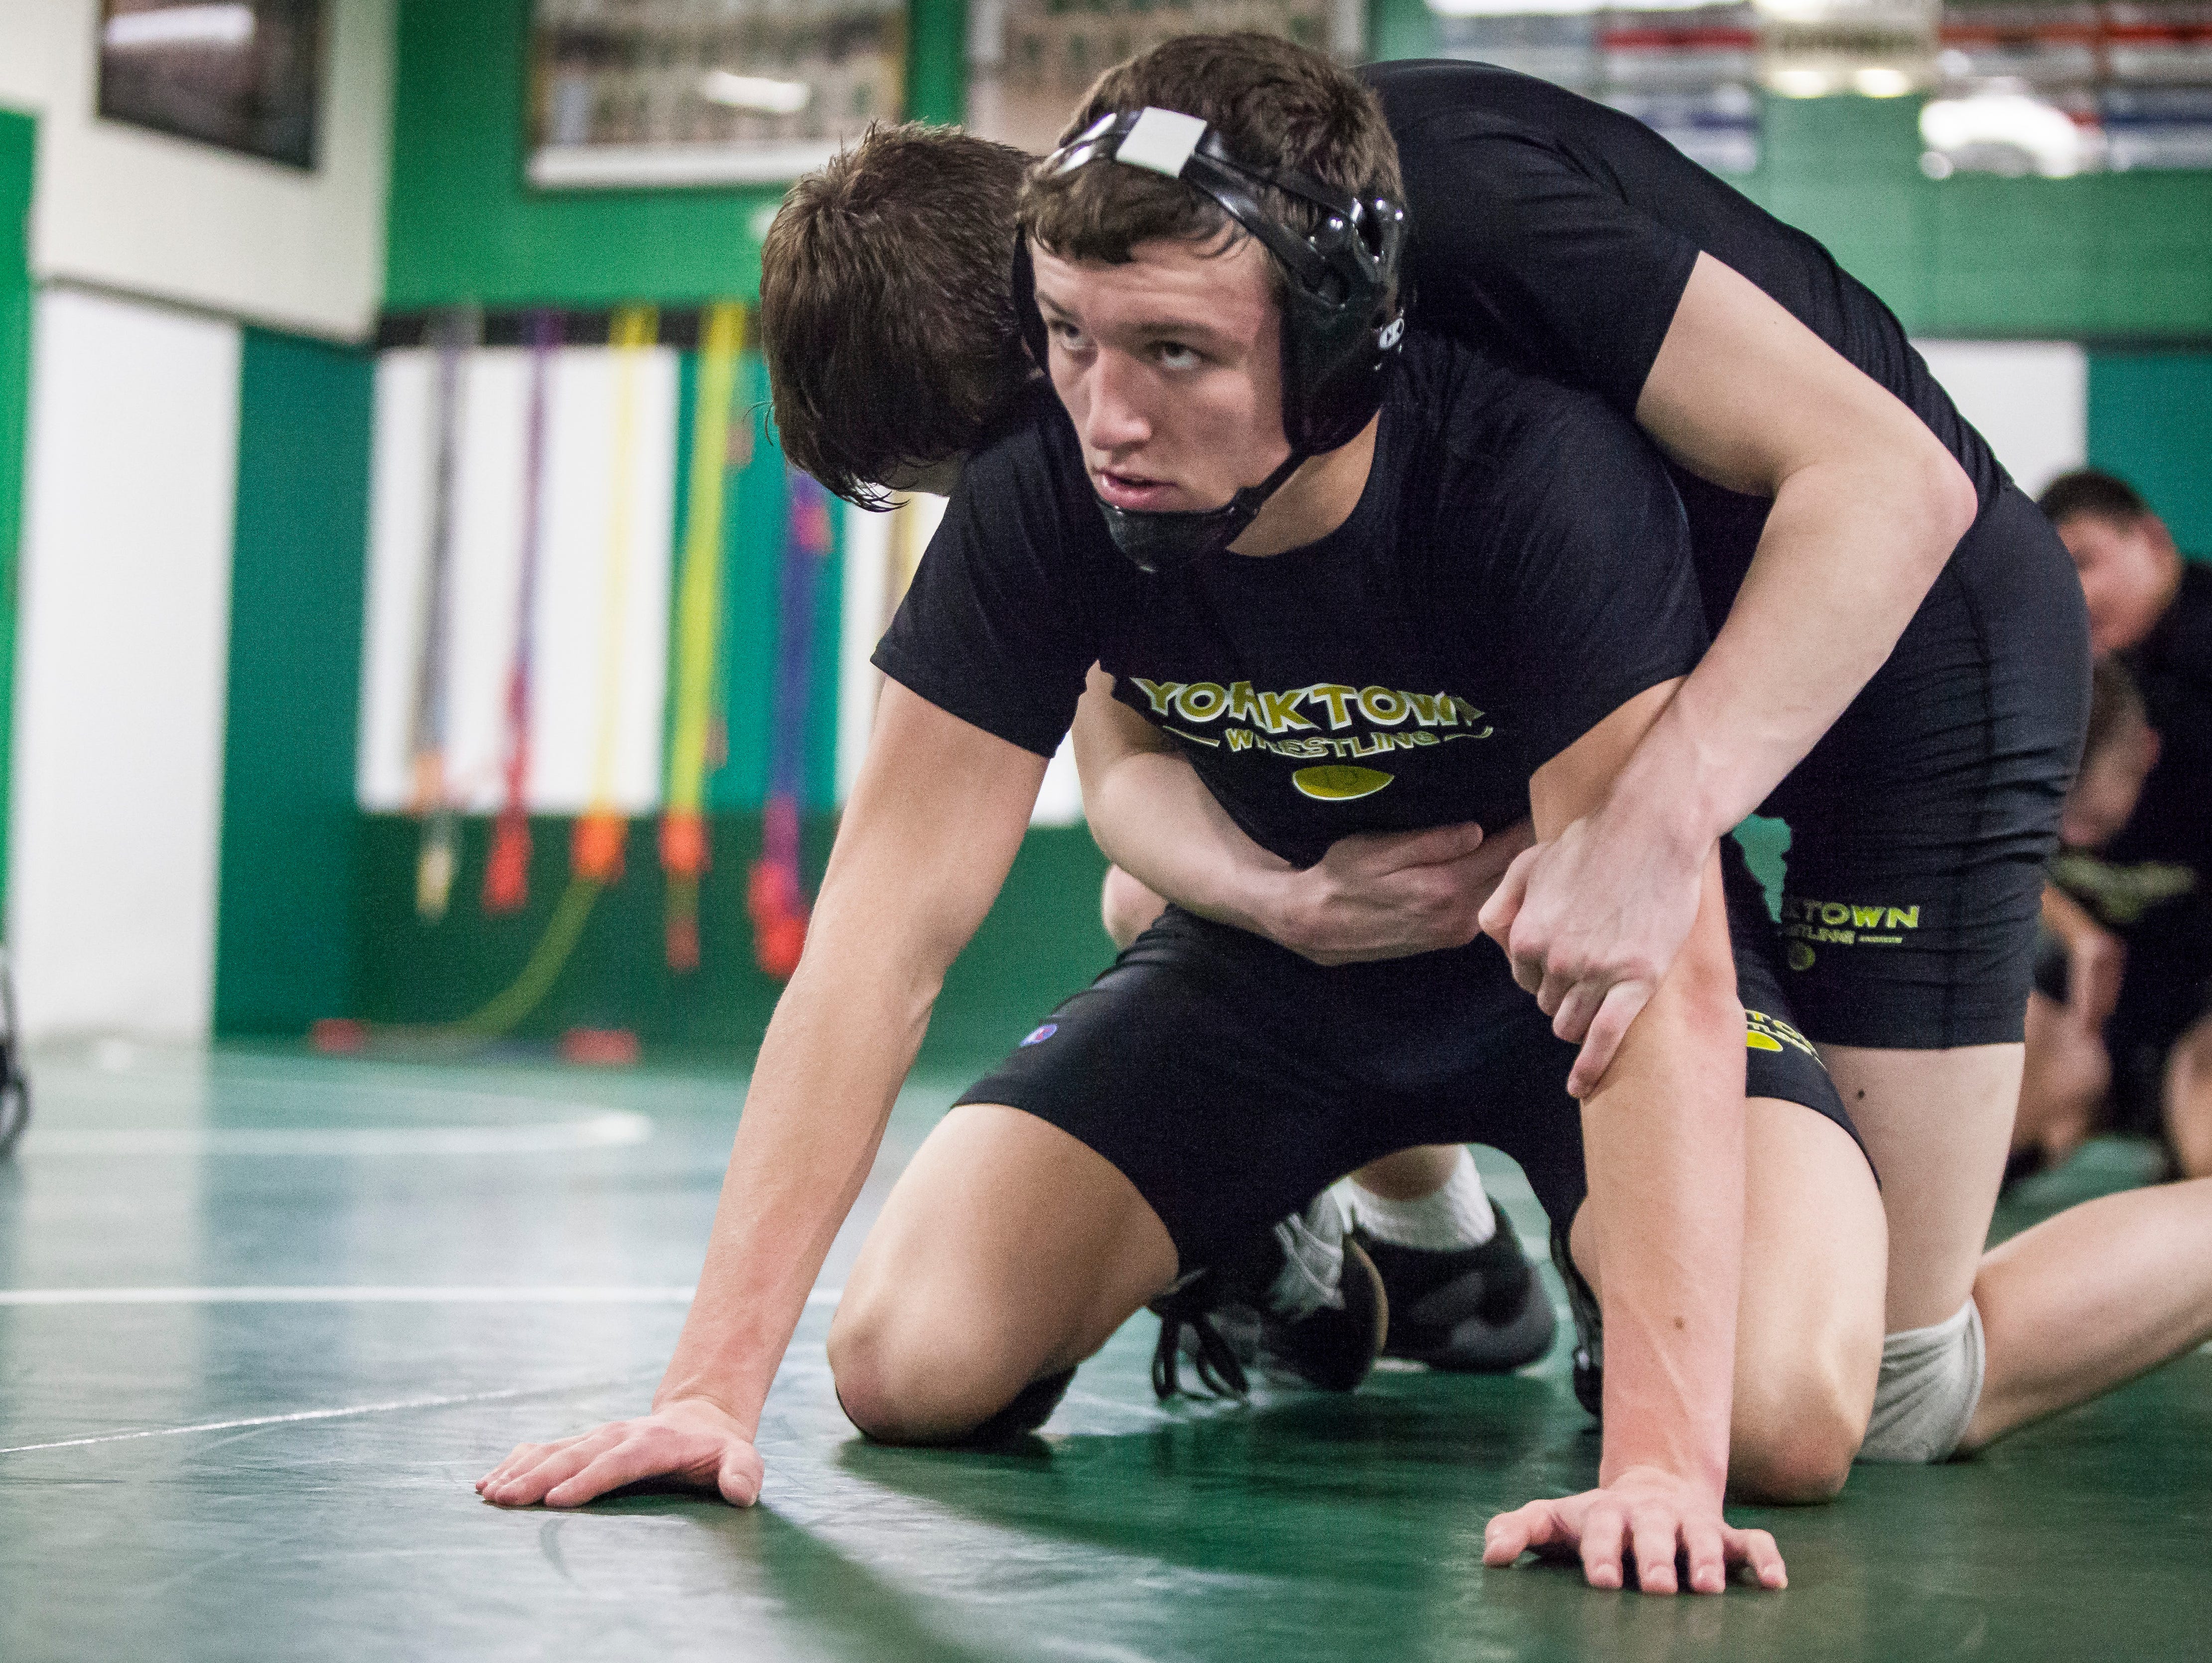 Cael McCormick practices with another Yorktown wrestler at Yorktown High School. This season will be McCormick's last for his high school career.